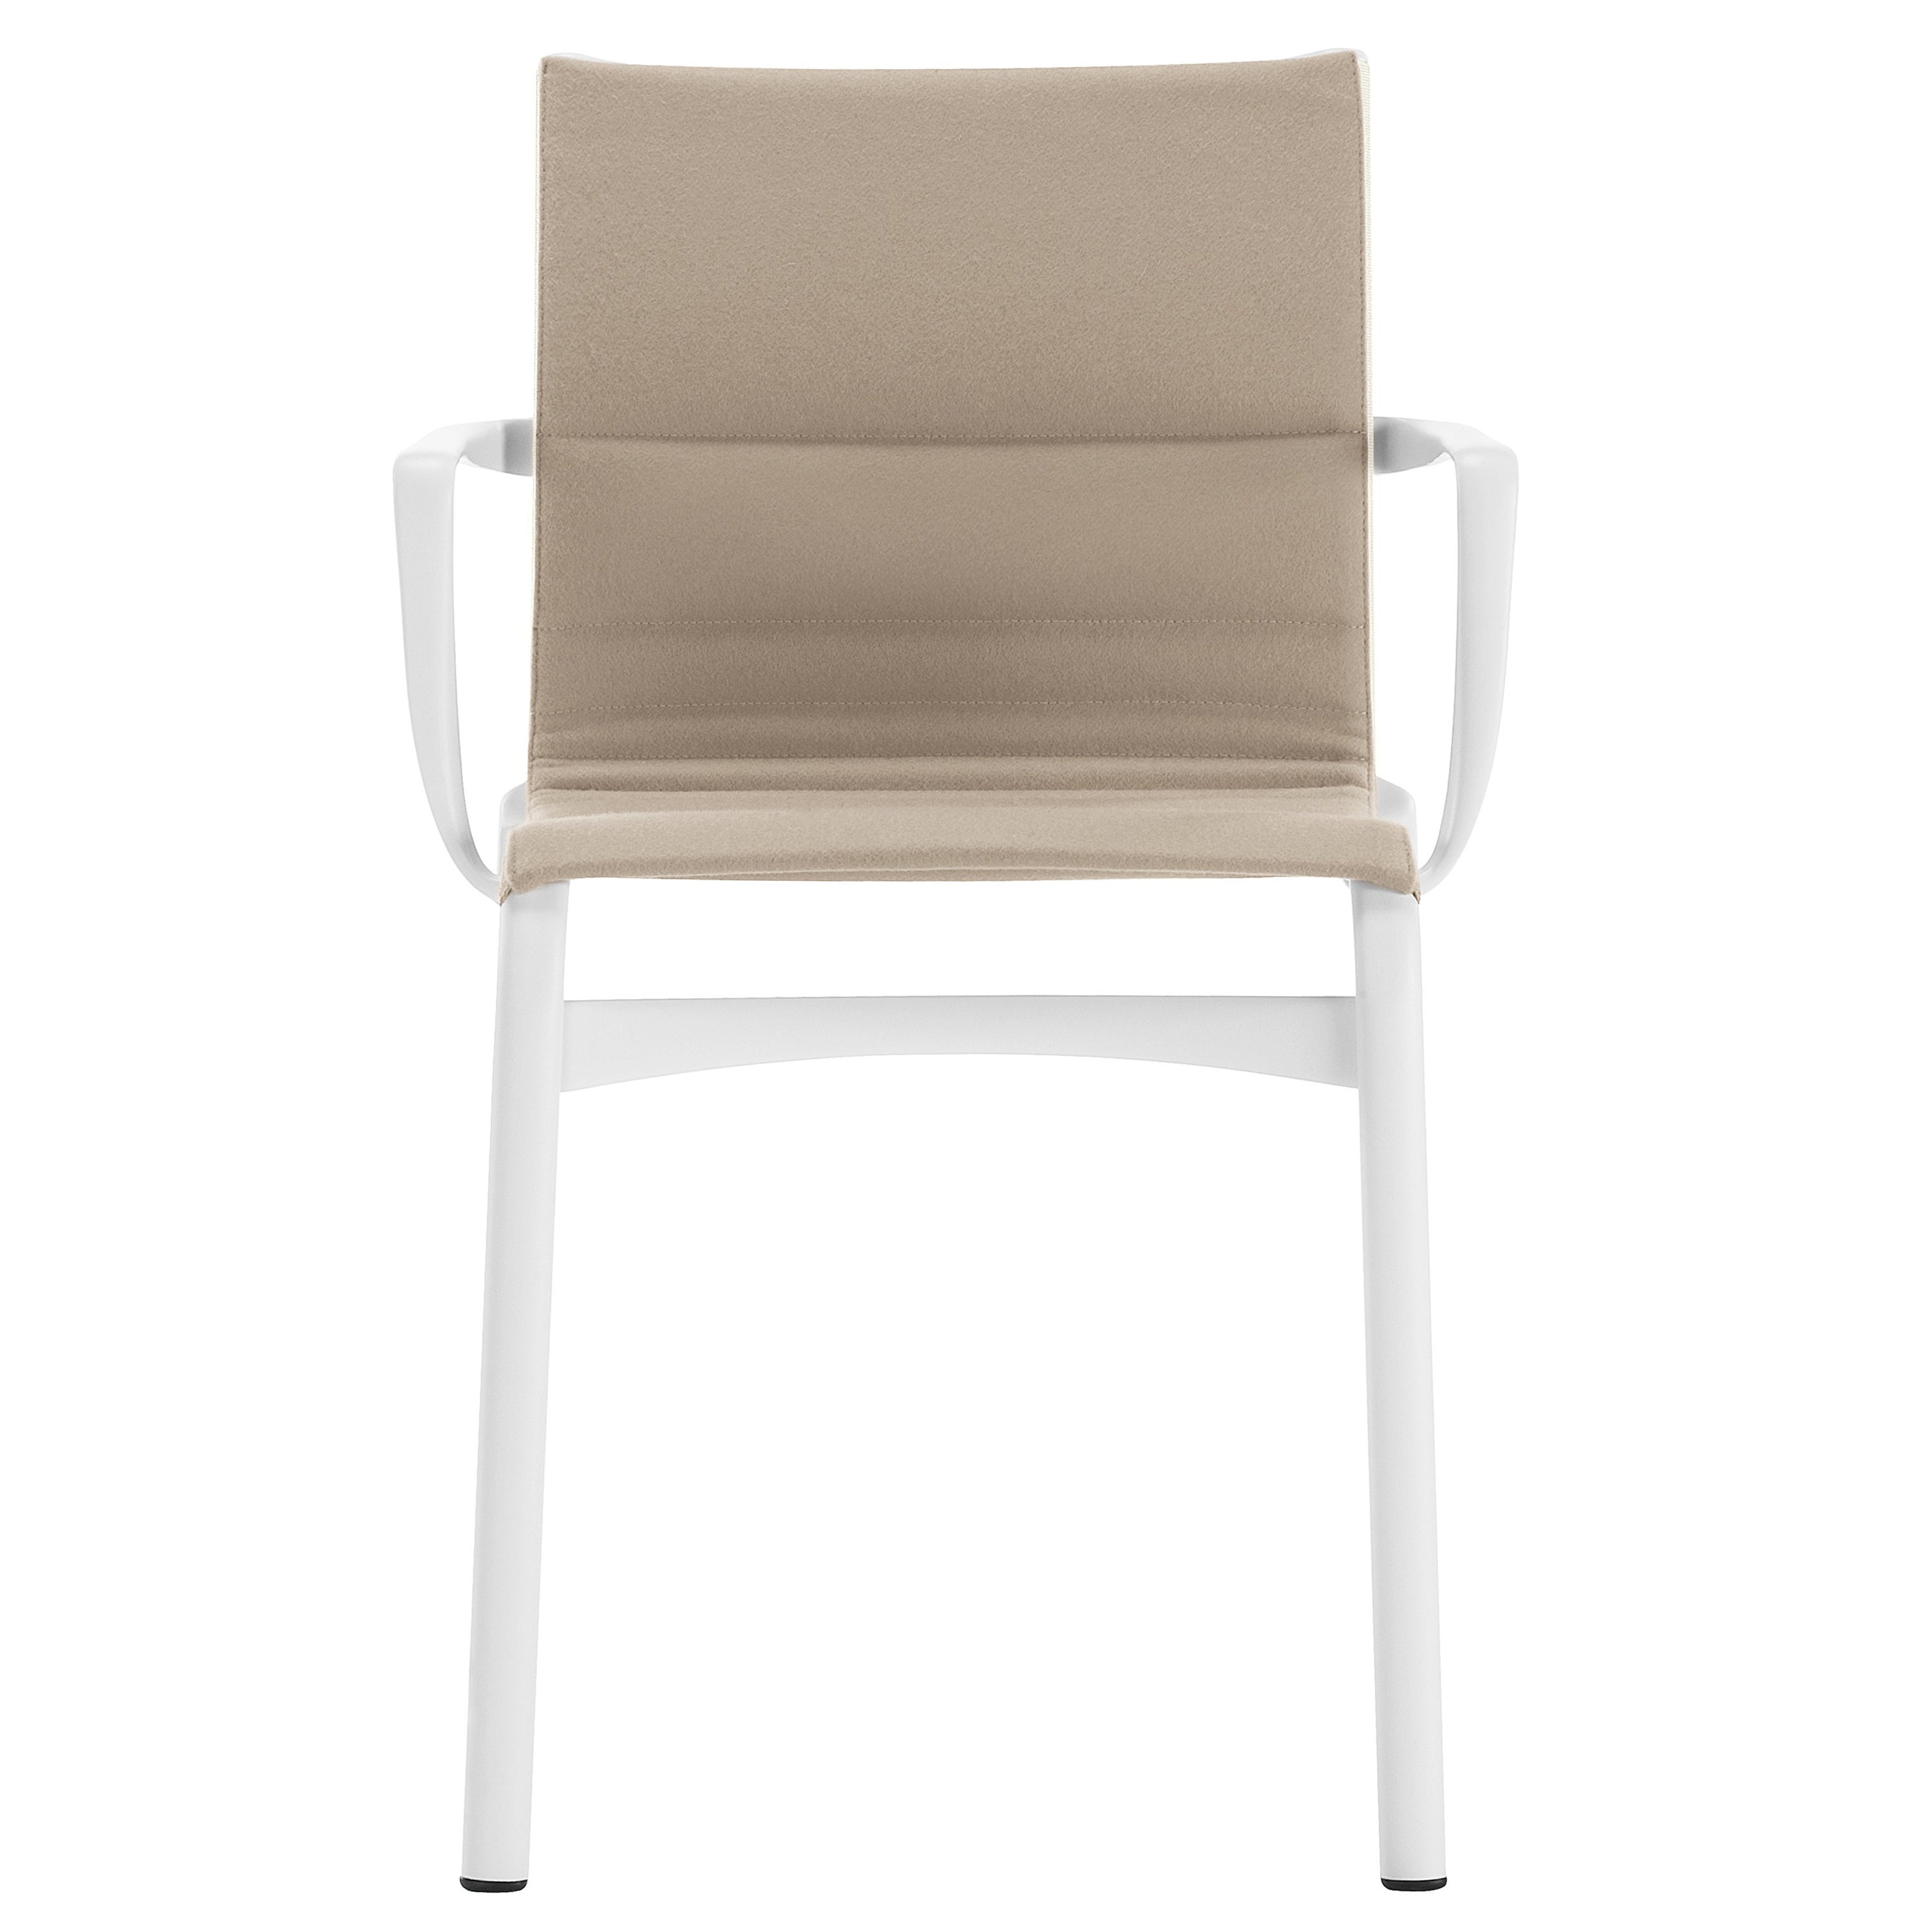 Alias 417 Highframe 40 Chair in Beige Seat with White Lacquered Aluminium Frame For Sale